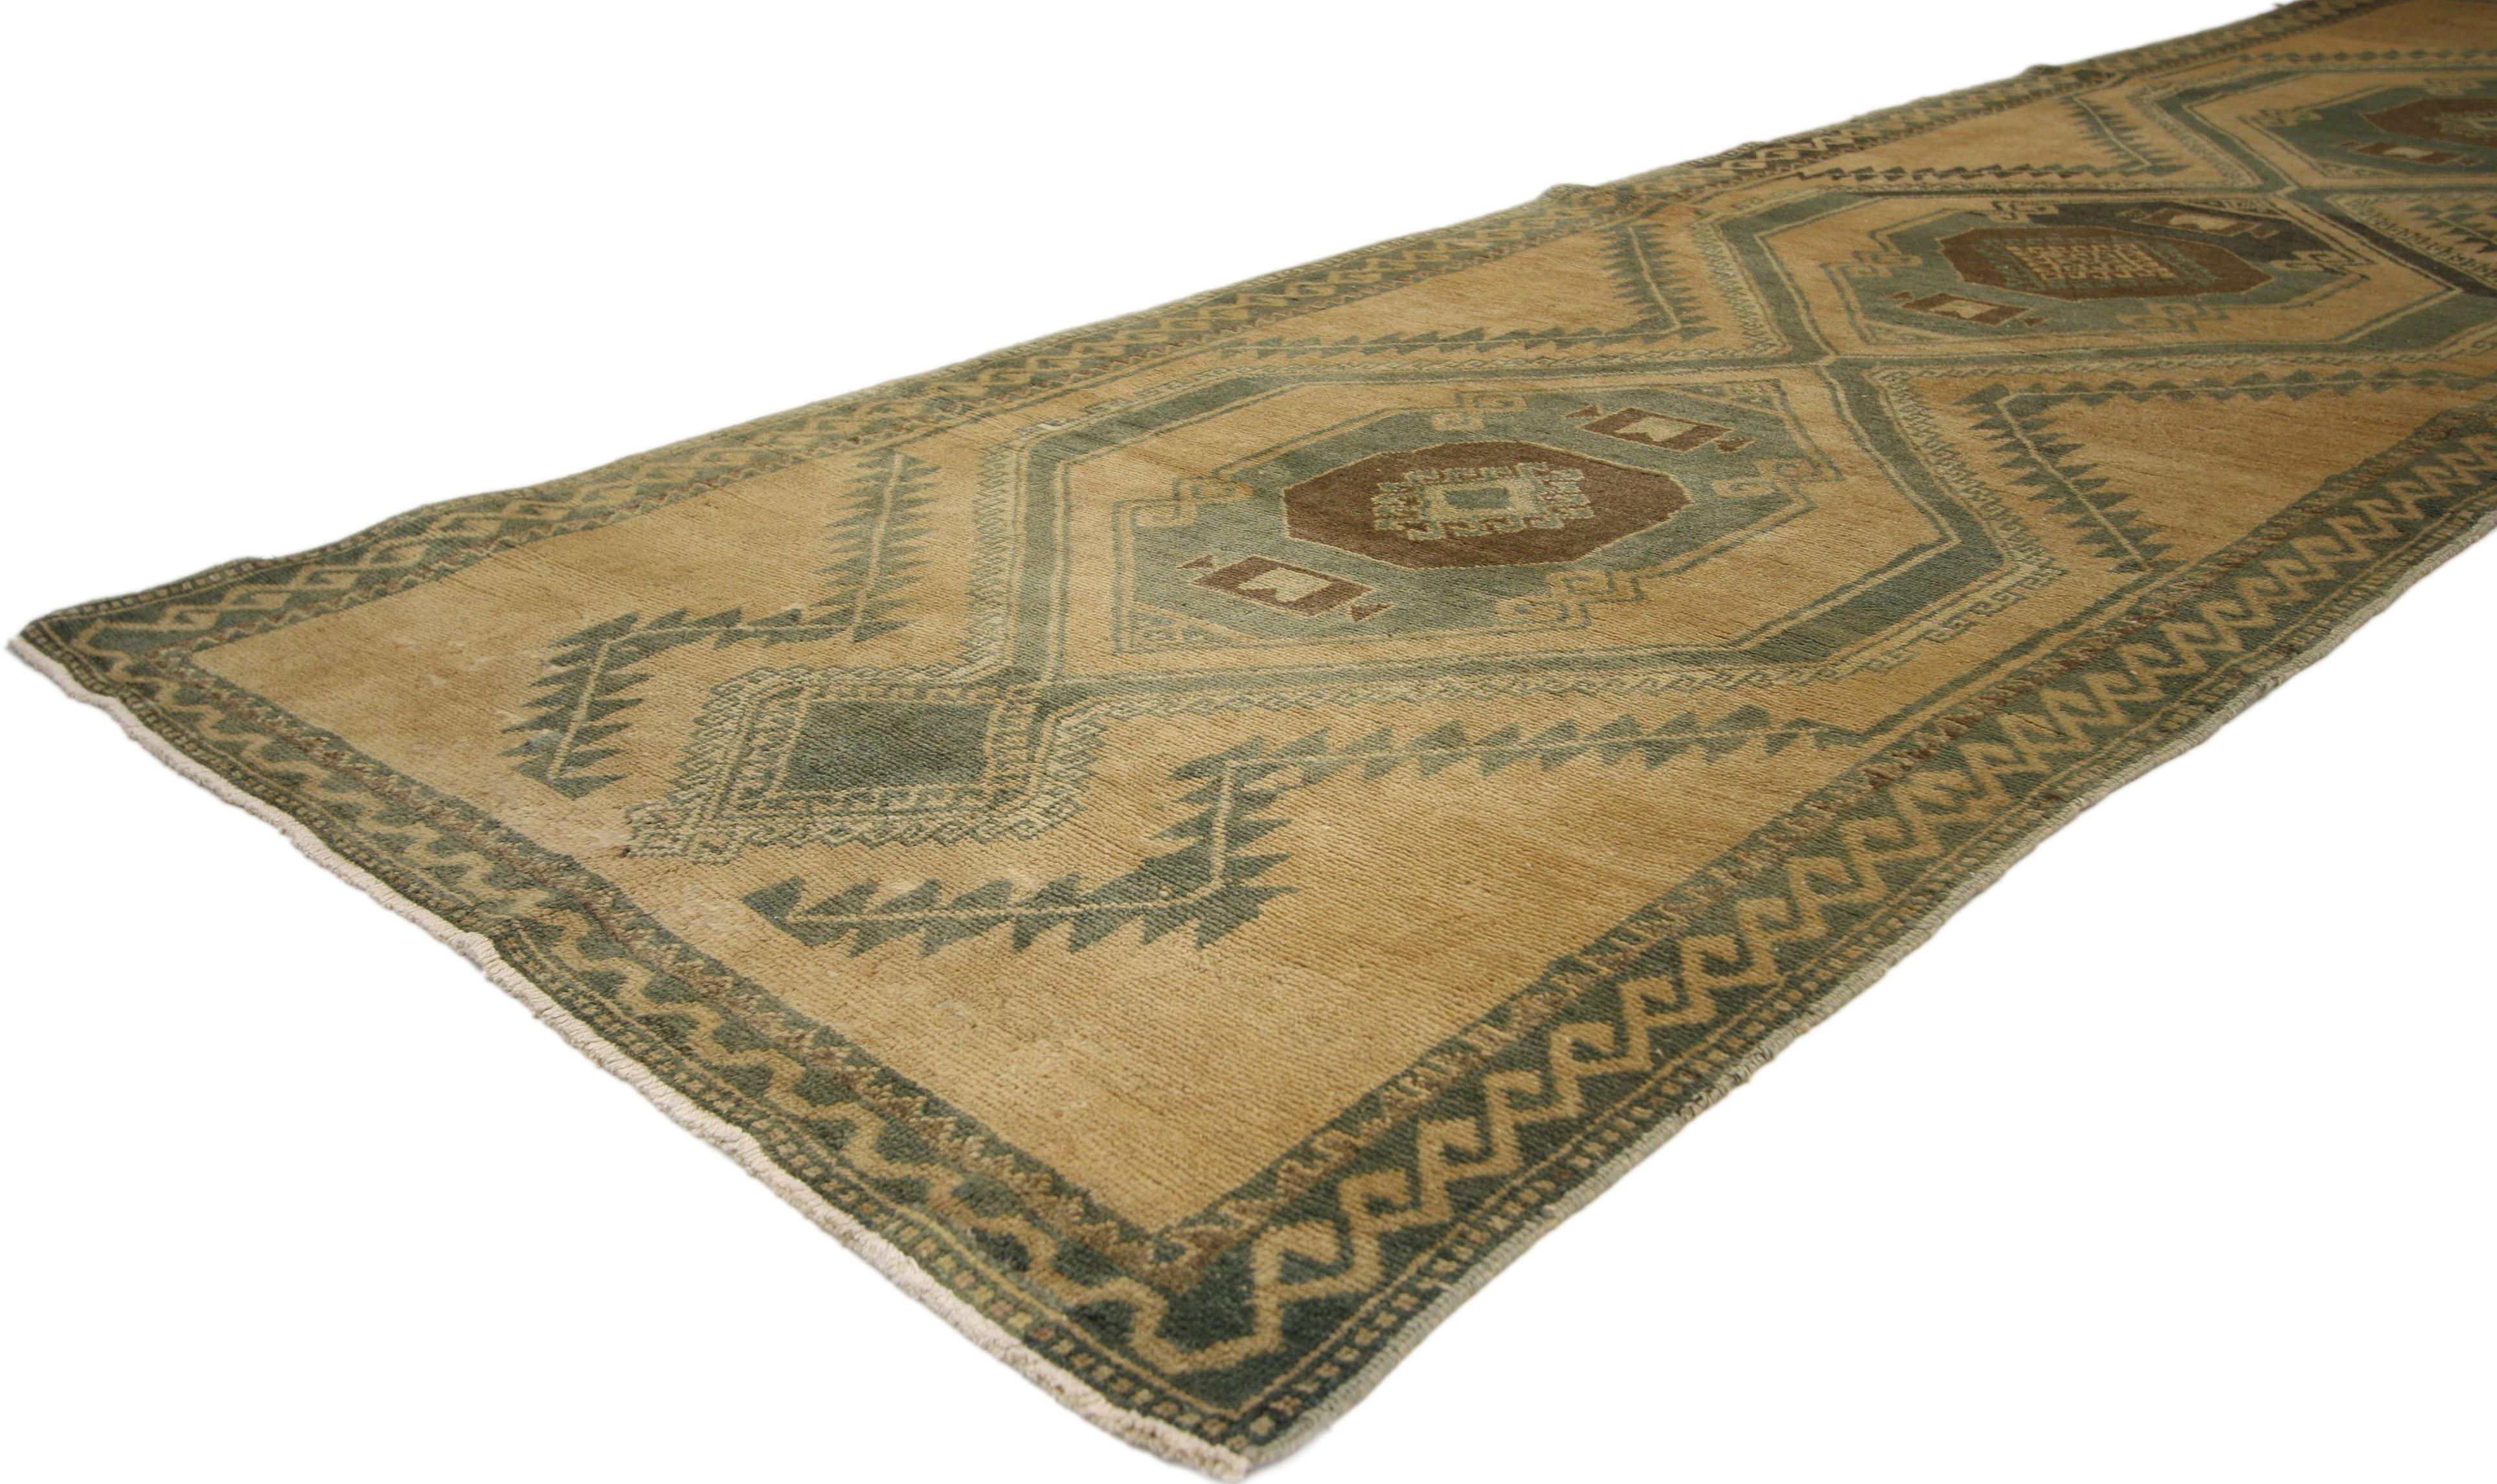 50351, Mid-Century Modern style vintage Turkish Oushak runner, hallway runner. Warm, rich and neutral, this hand-knotted wool vintage Turkish Oushak runner features three interconnected hexagonal medallions with diamond pendants across an abrashed